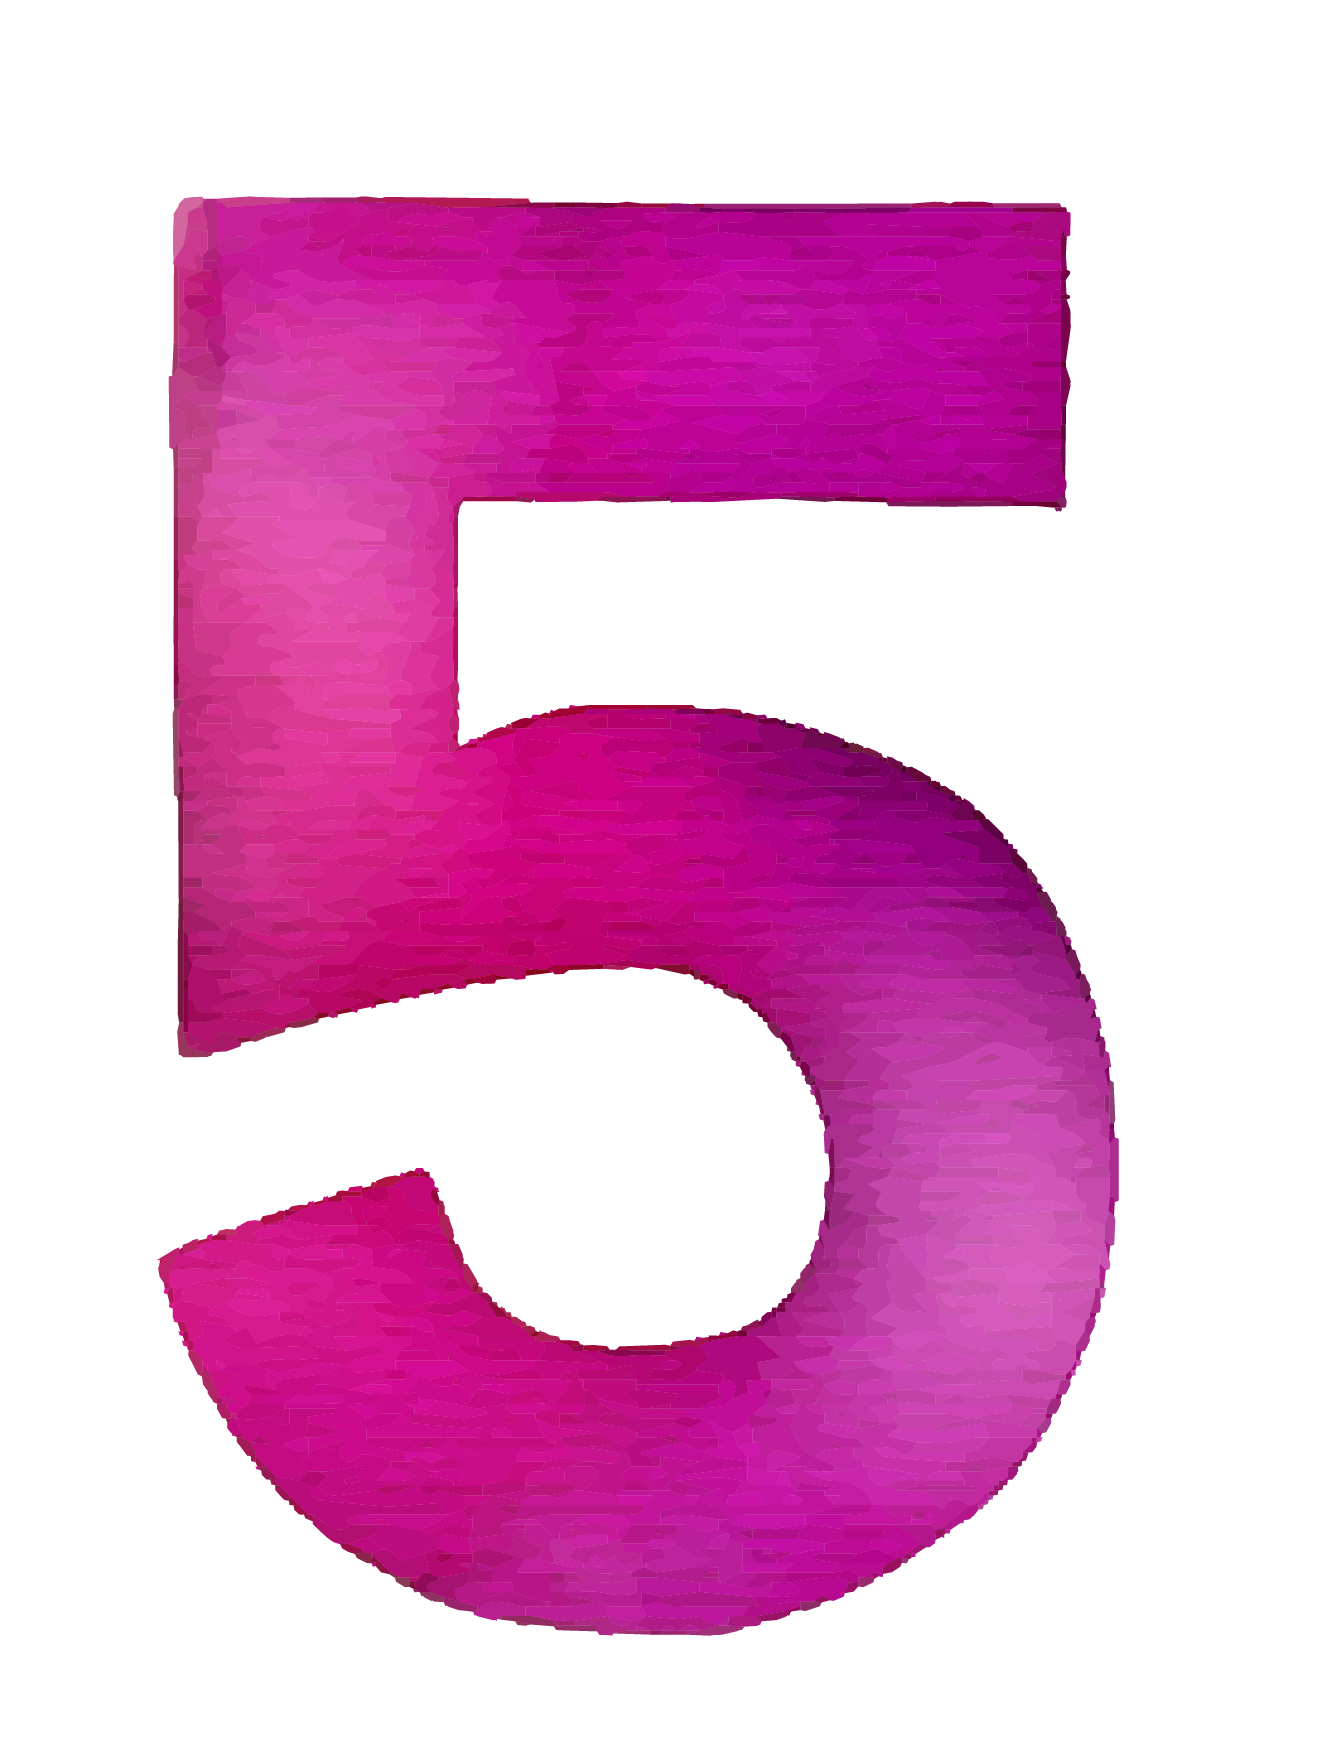 5 Number PNG Images Transparent Background | PNG Play
